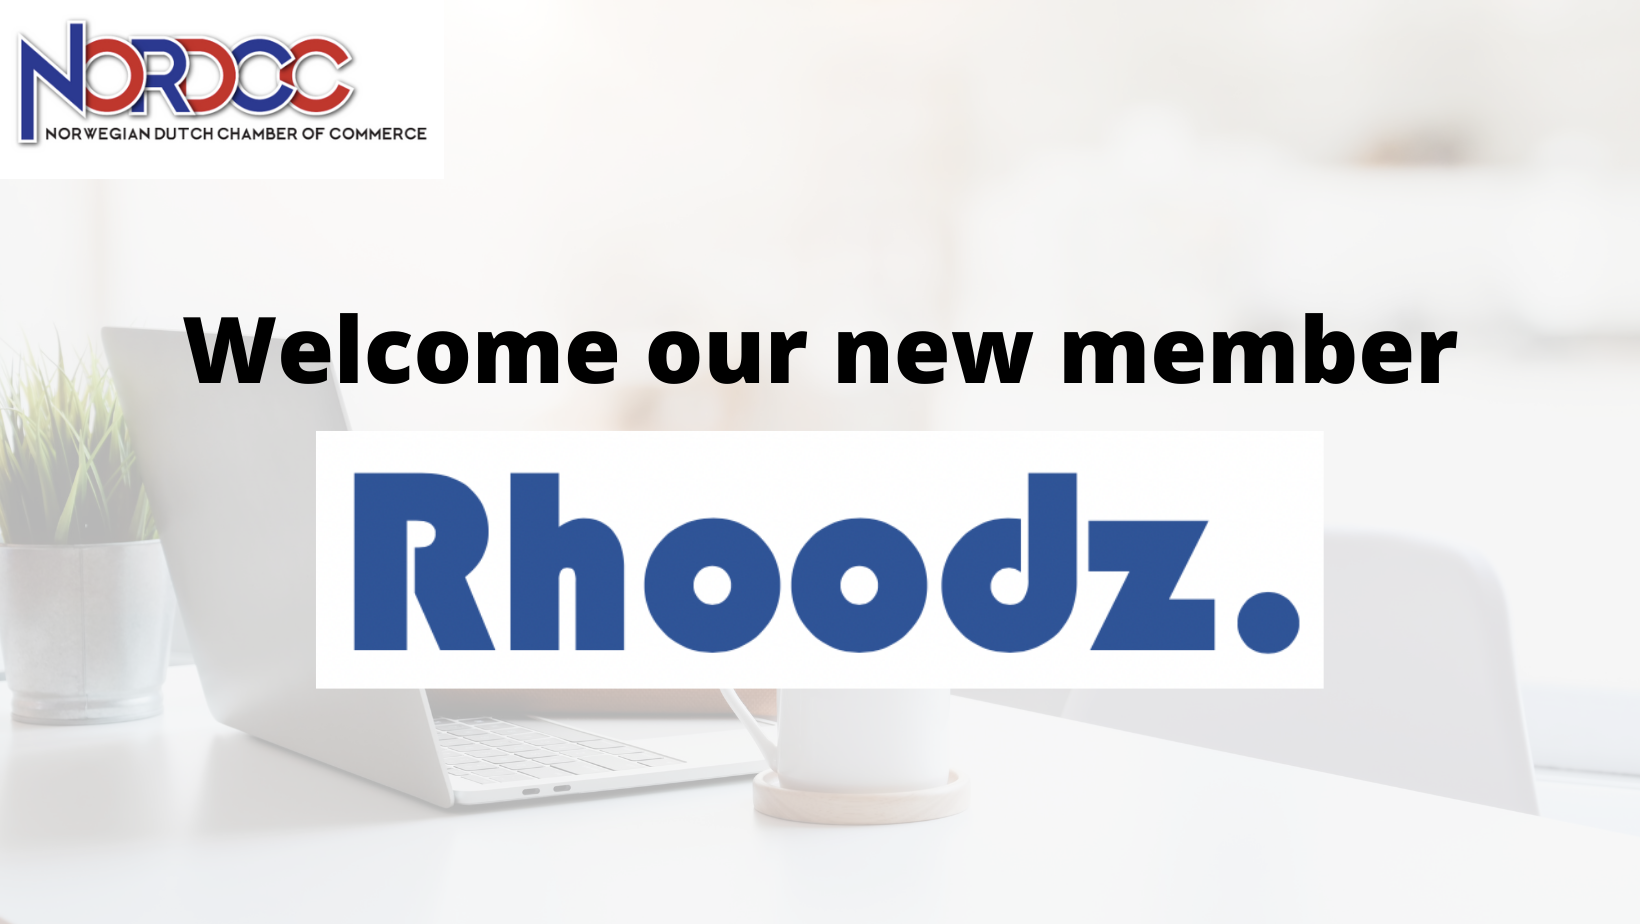 We welcome our new member Rhoodz.com